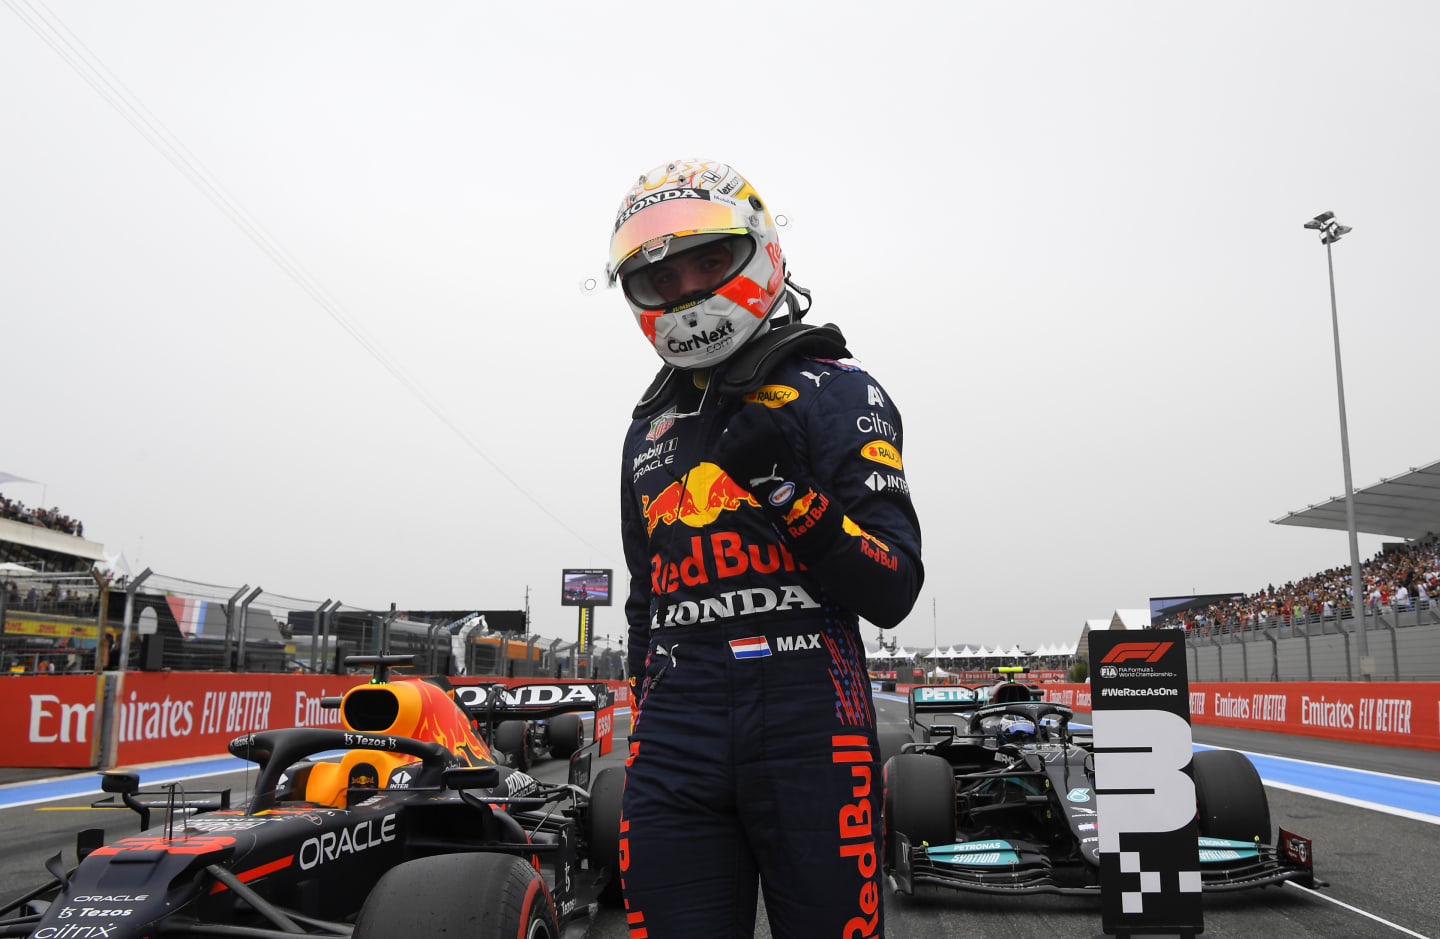 LE CASTELLET, FRANCE - JUNE 19: Pole position qualifier Max Verstappen of Netherlands and Red Bull Racing celebrates in parc ferme during qualifying ahead of the F1 Grand Prix of France at Circuit Paul Ricard on June 19, 2021 in Le Castellet, France. (Photo by Nicolas Tucat - Pool/Getty Images)